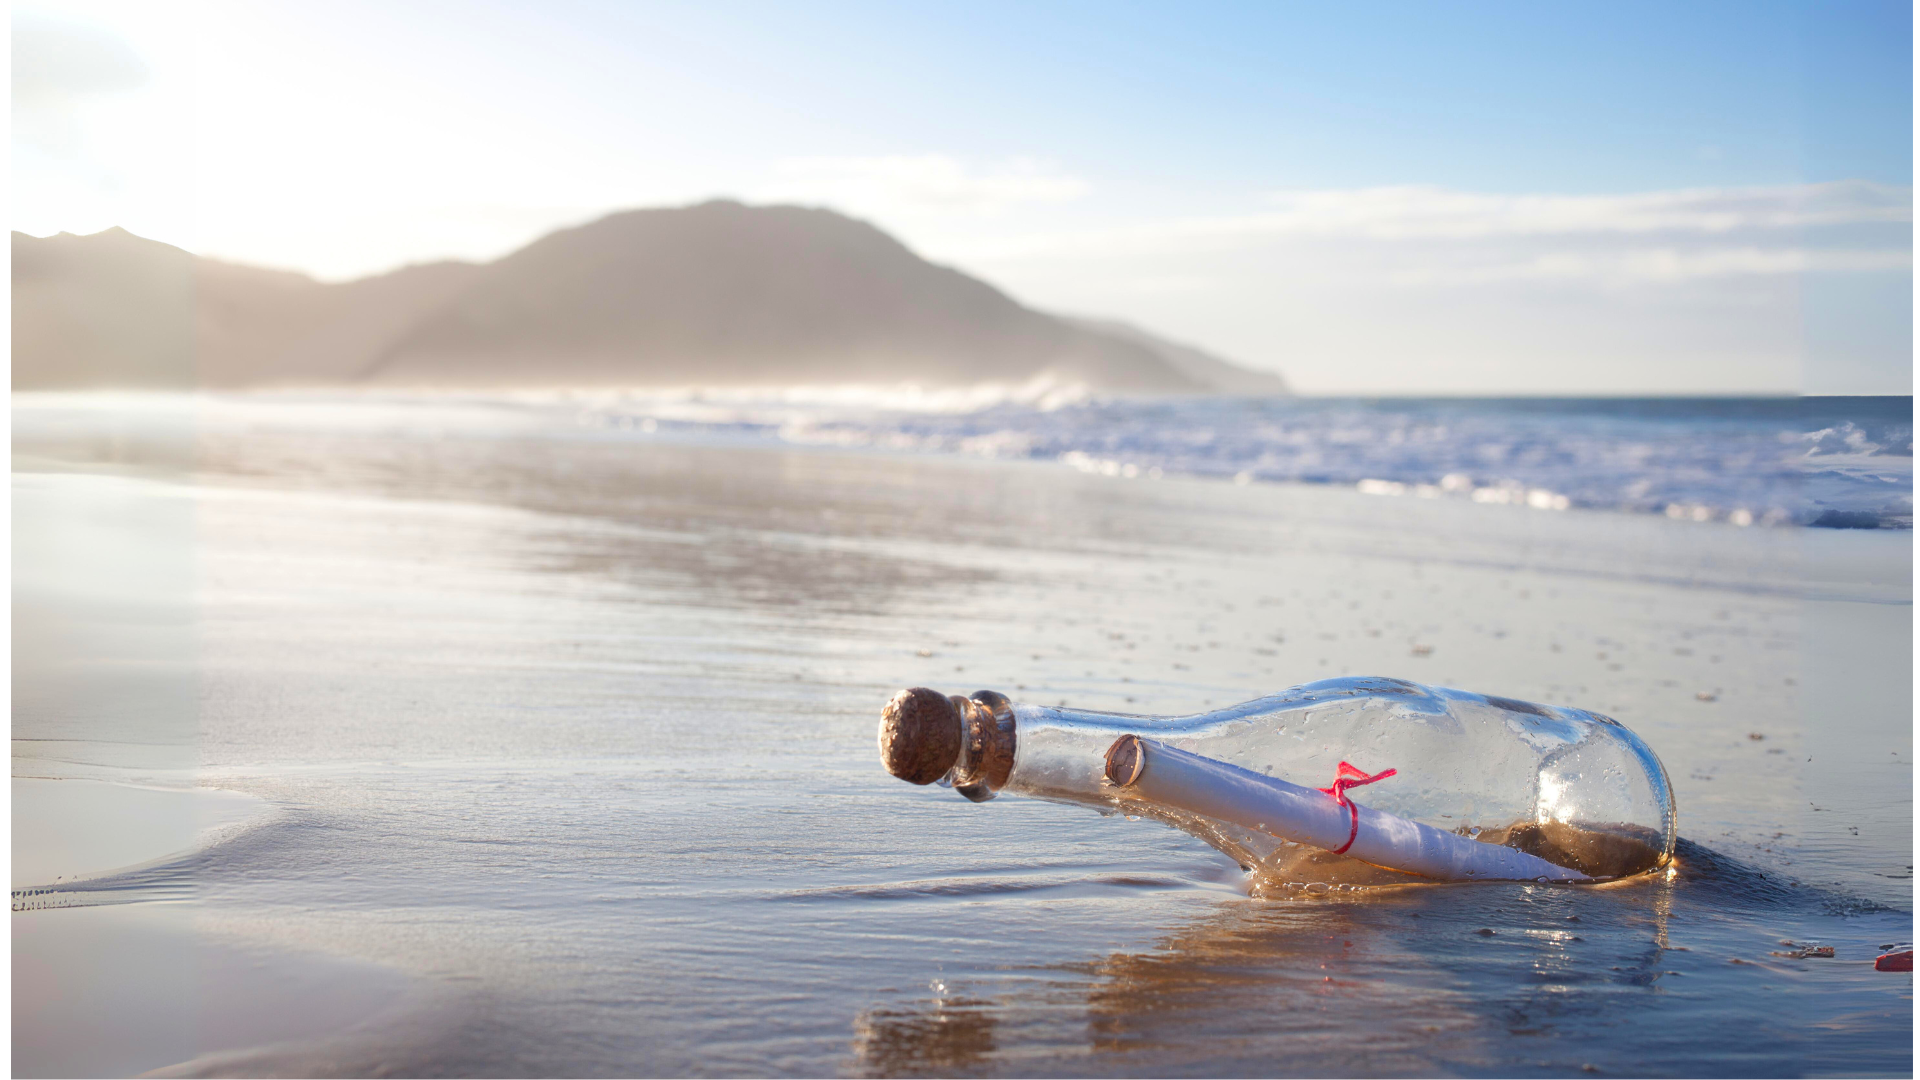 A clear glass bottle washed up on a sandy beach with a white paper note rolled up inside and tied with a red string. In the distance waves wash ashore and a radiant, cool blue sky is partly hidden behind a mountain that appears on the horizon.